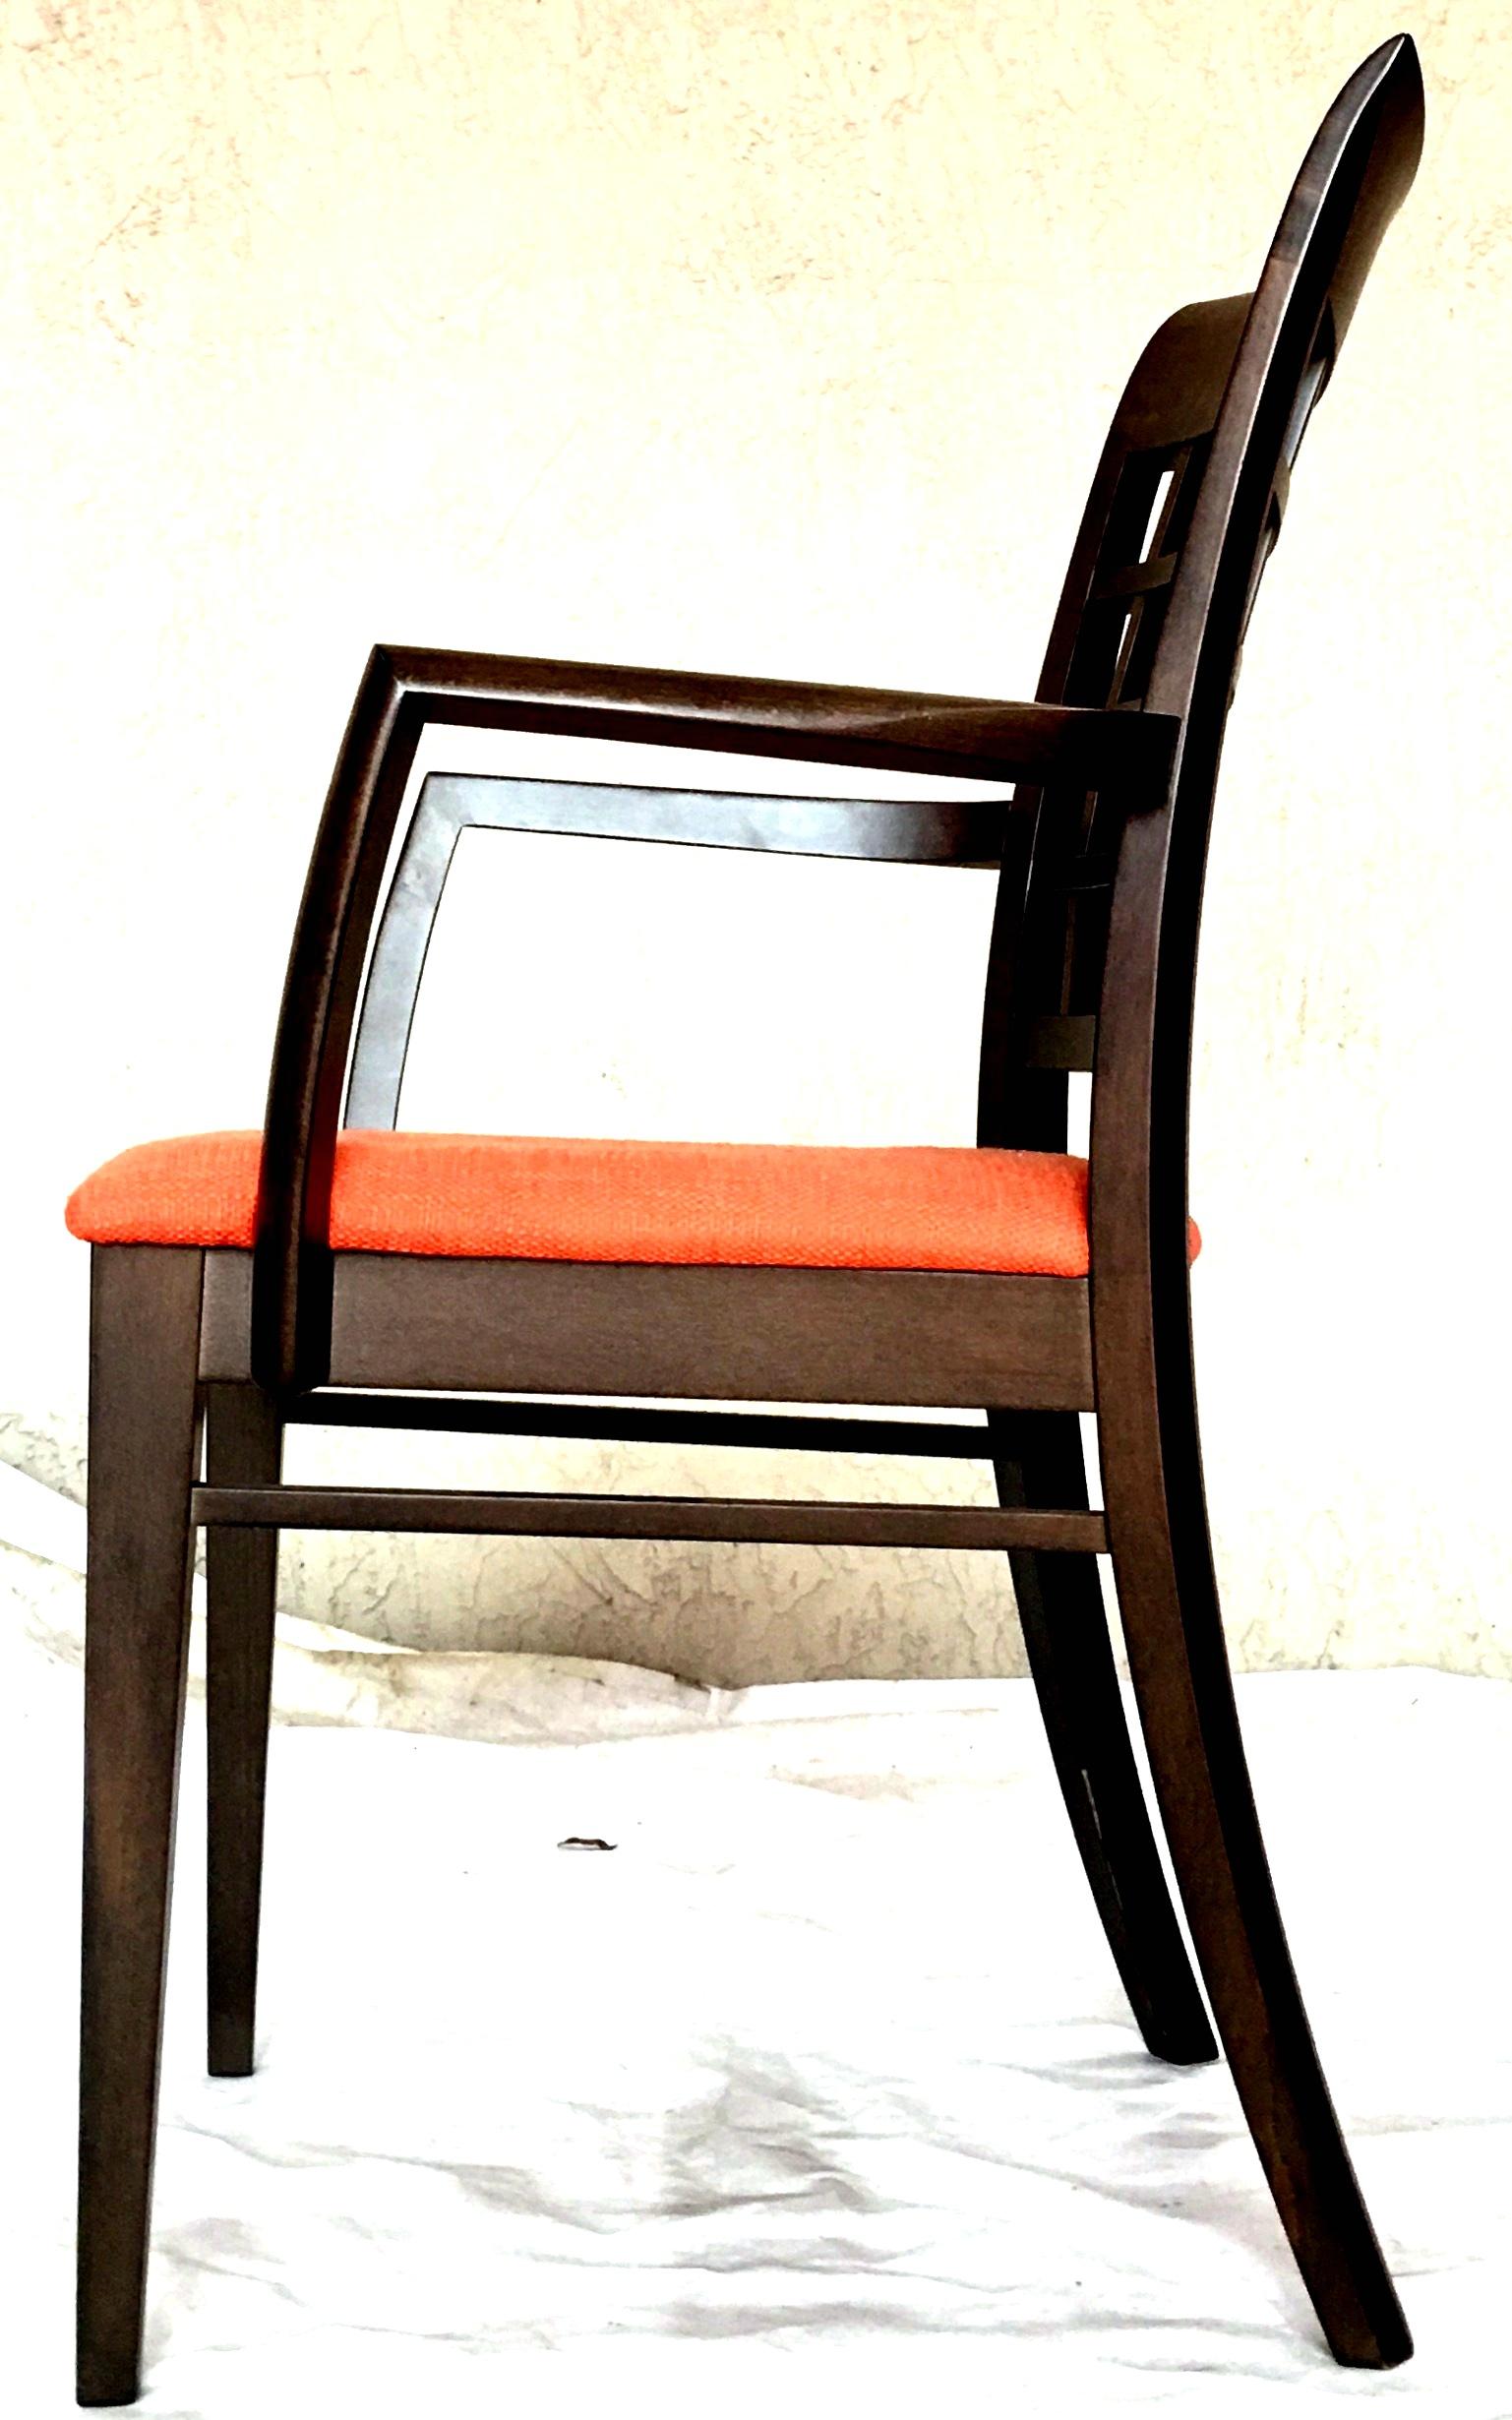 Contemporary 21st Century Italian Upholstered Dining Chairs by, Potocco for Roche Bobois-S/6